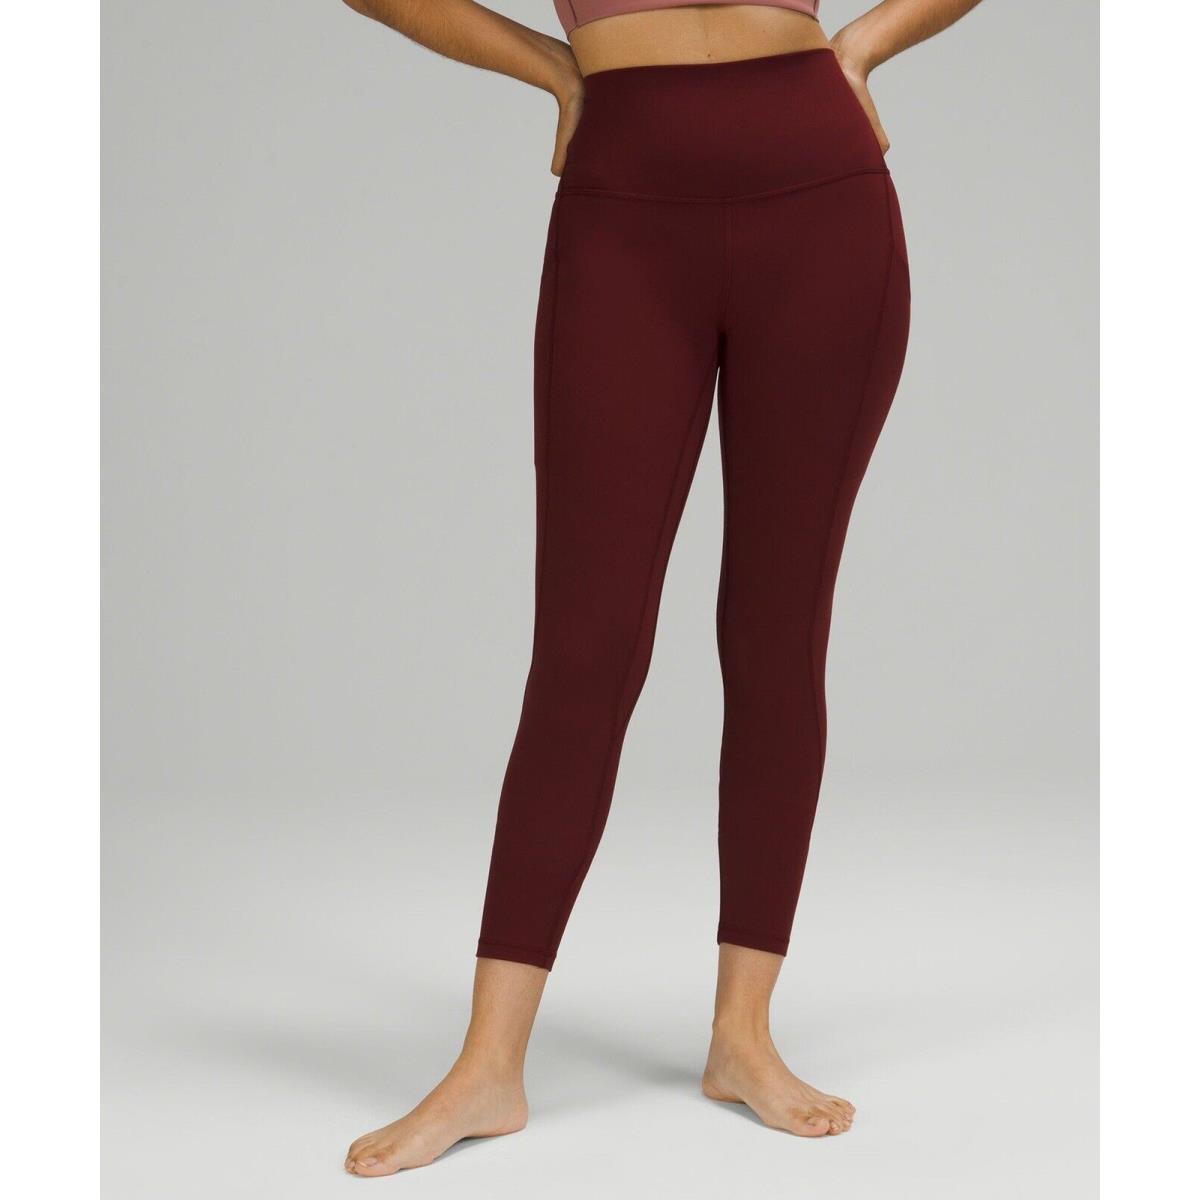 Lululemon Align High-rise Pant with Pockets 25 - Red Merlot Size 0